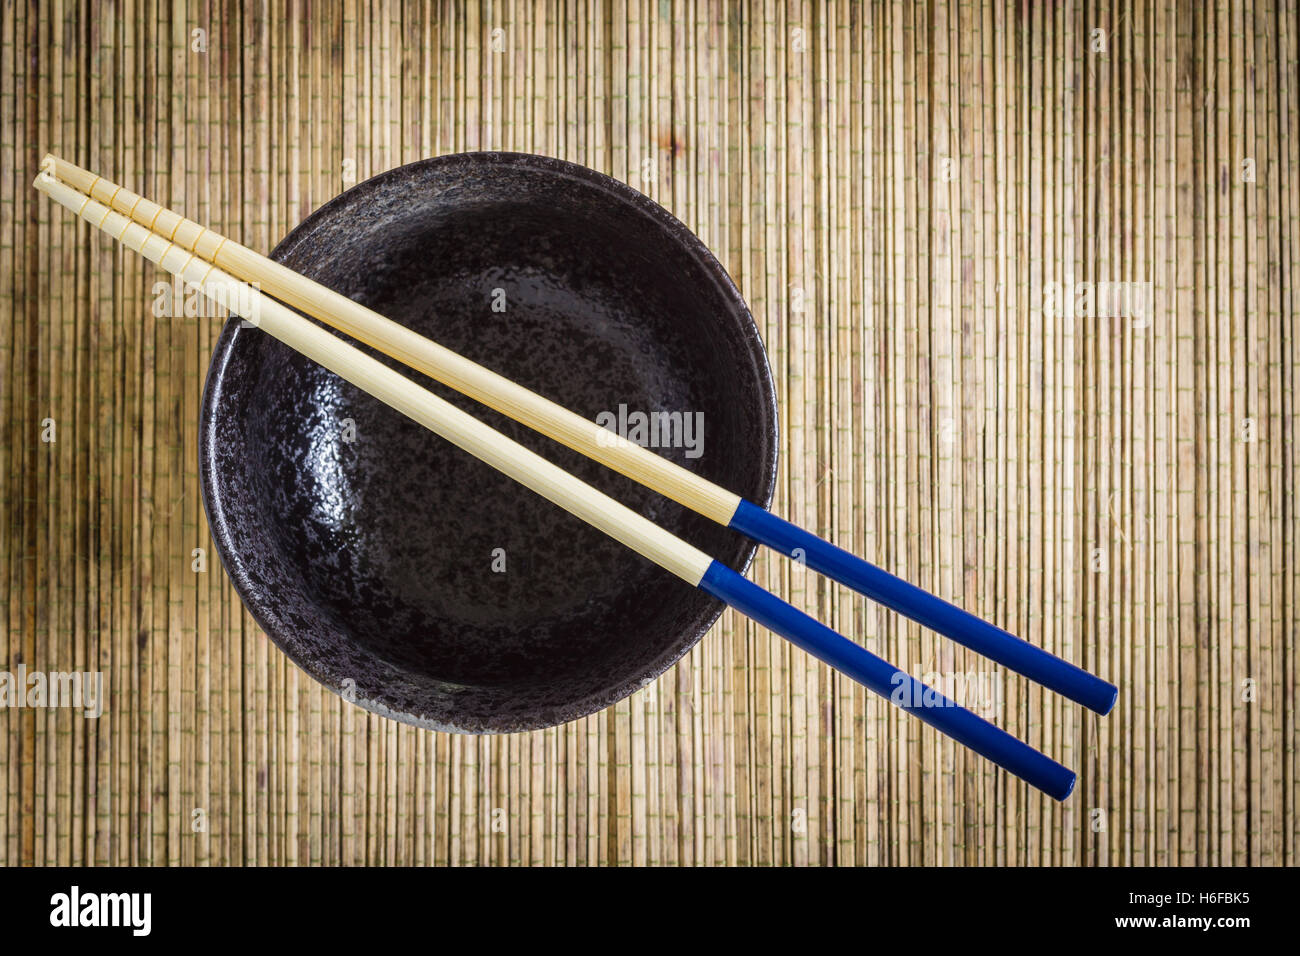 Chopsticks and rice or noodle bowl against a bamboo mat background ideal for Asian food subjects Stock Photo